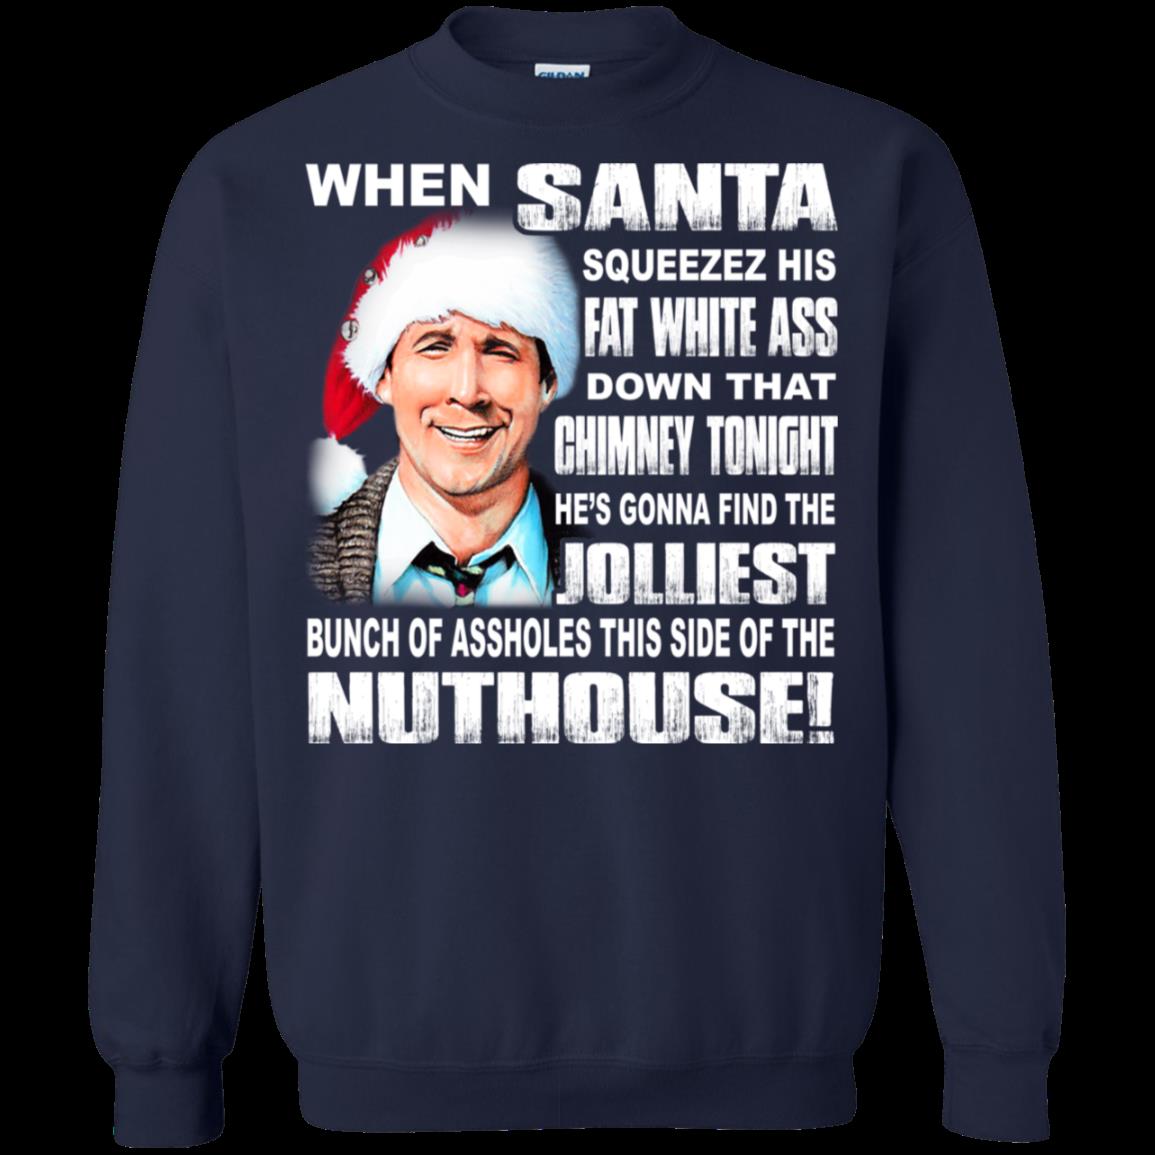 National Lampoon’s Christmas Vacation Shirts When Santa Squeezez Fat Ass 1